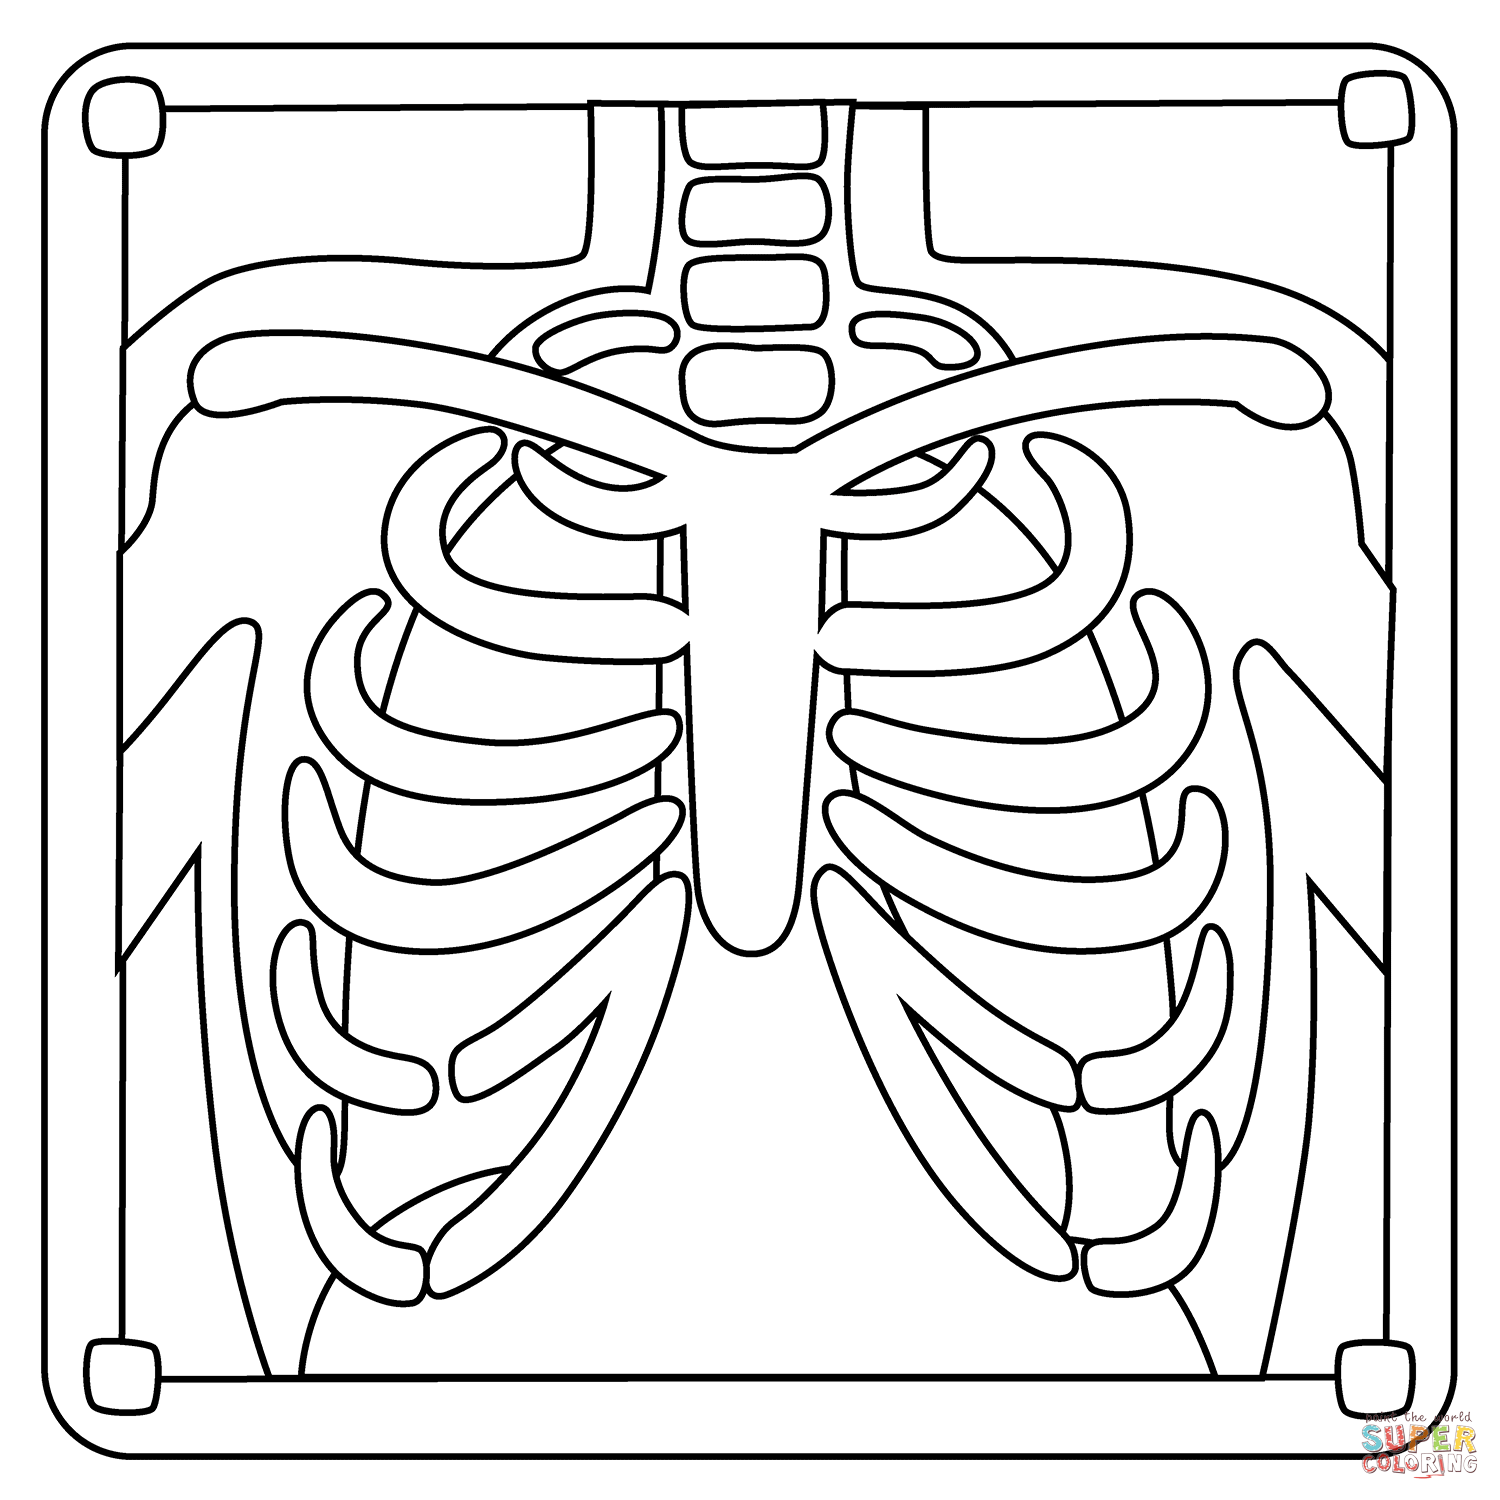 X ray emoji coloring page free printable coloring pages